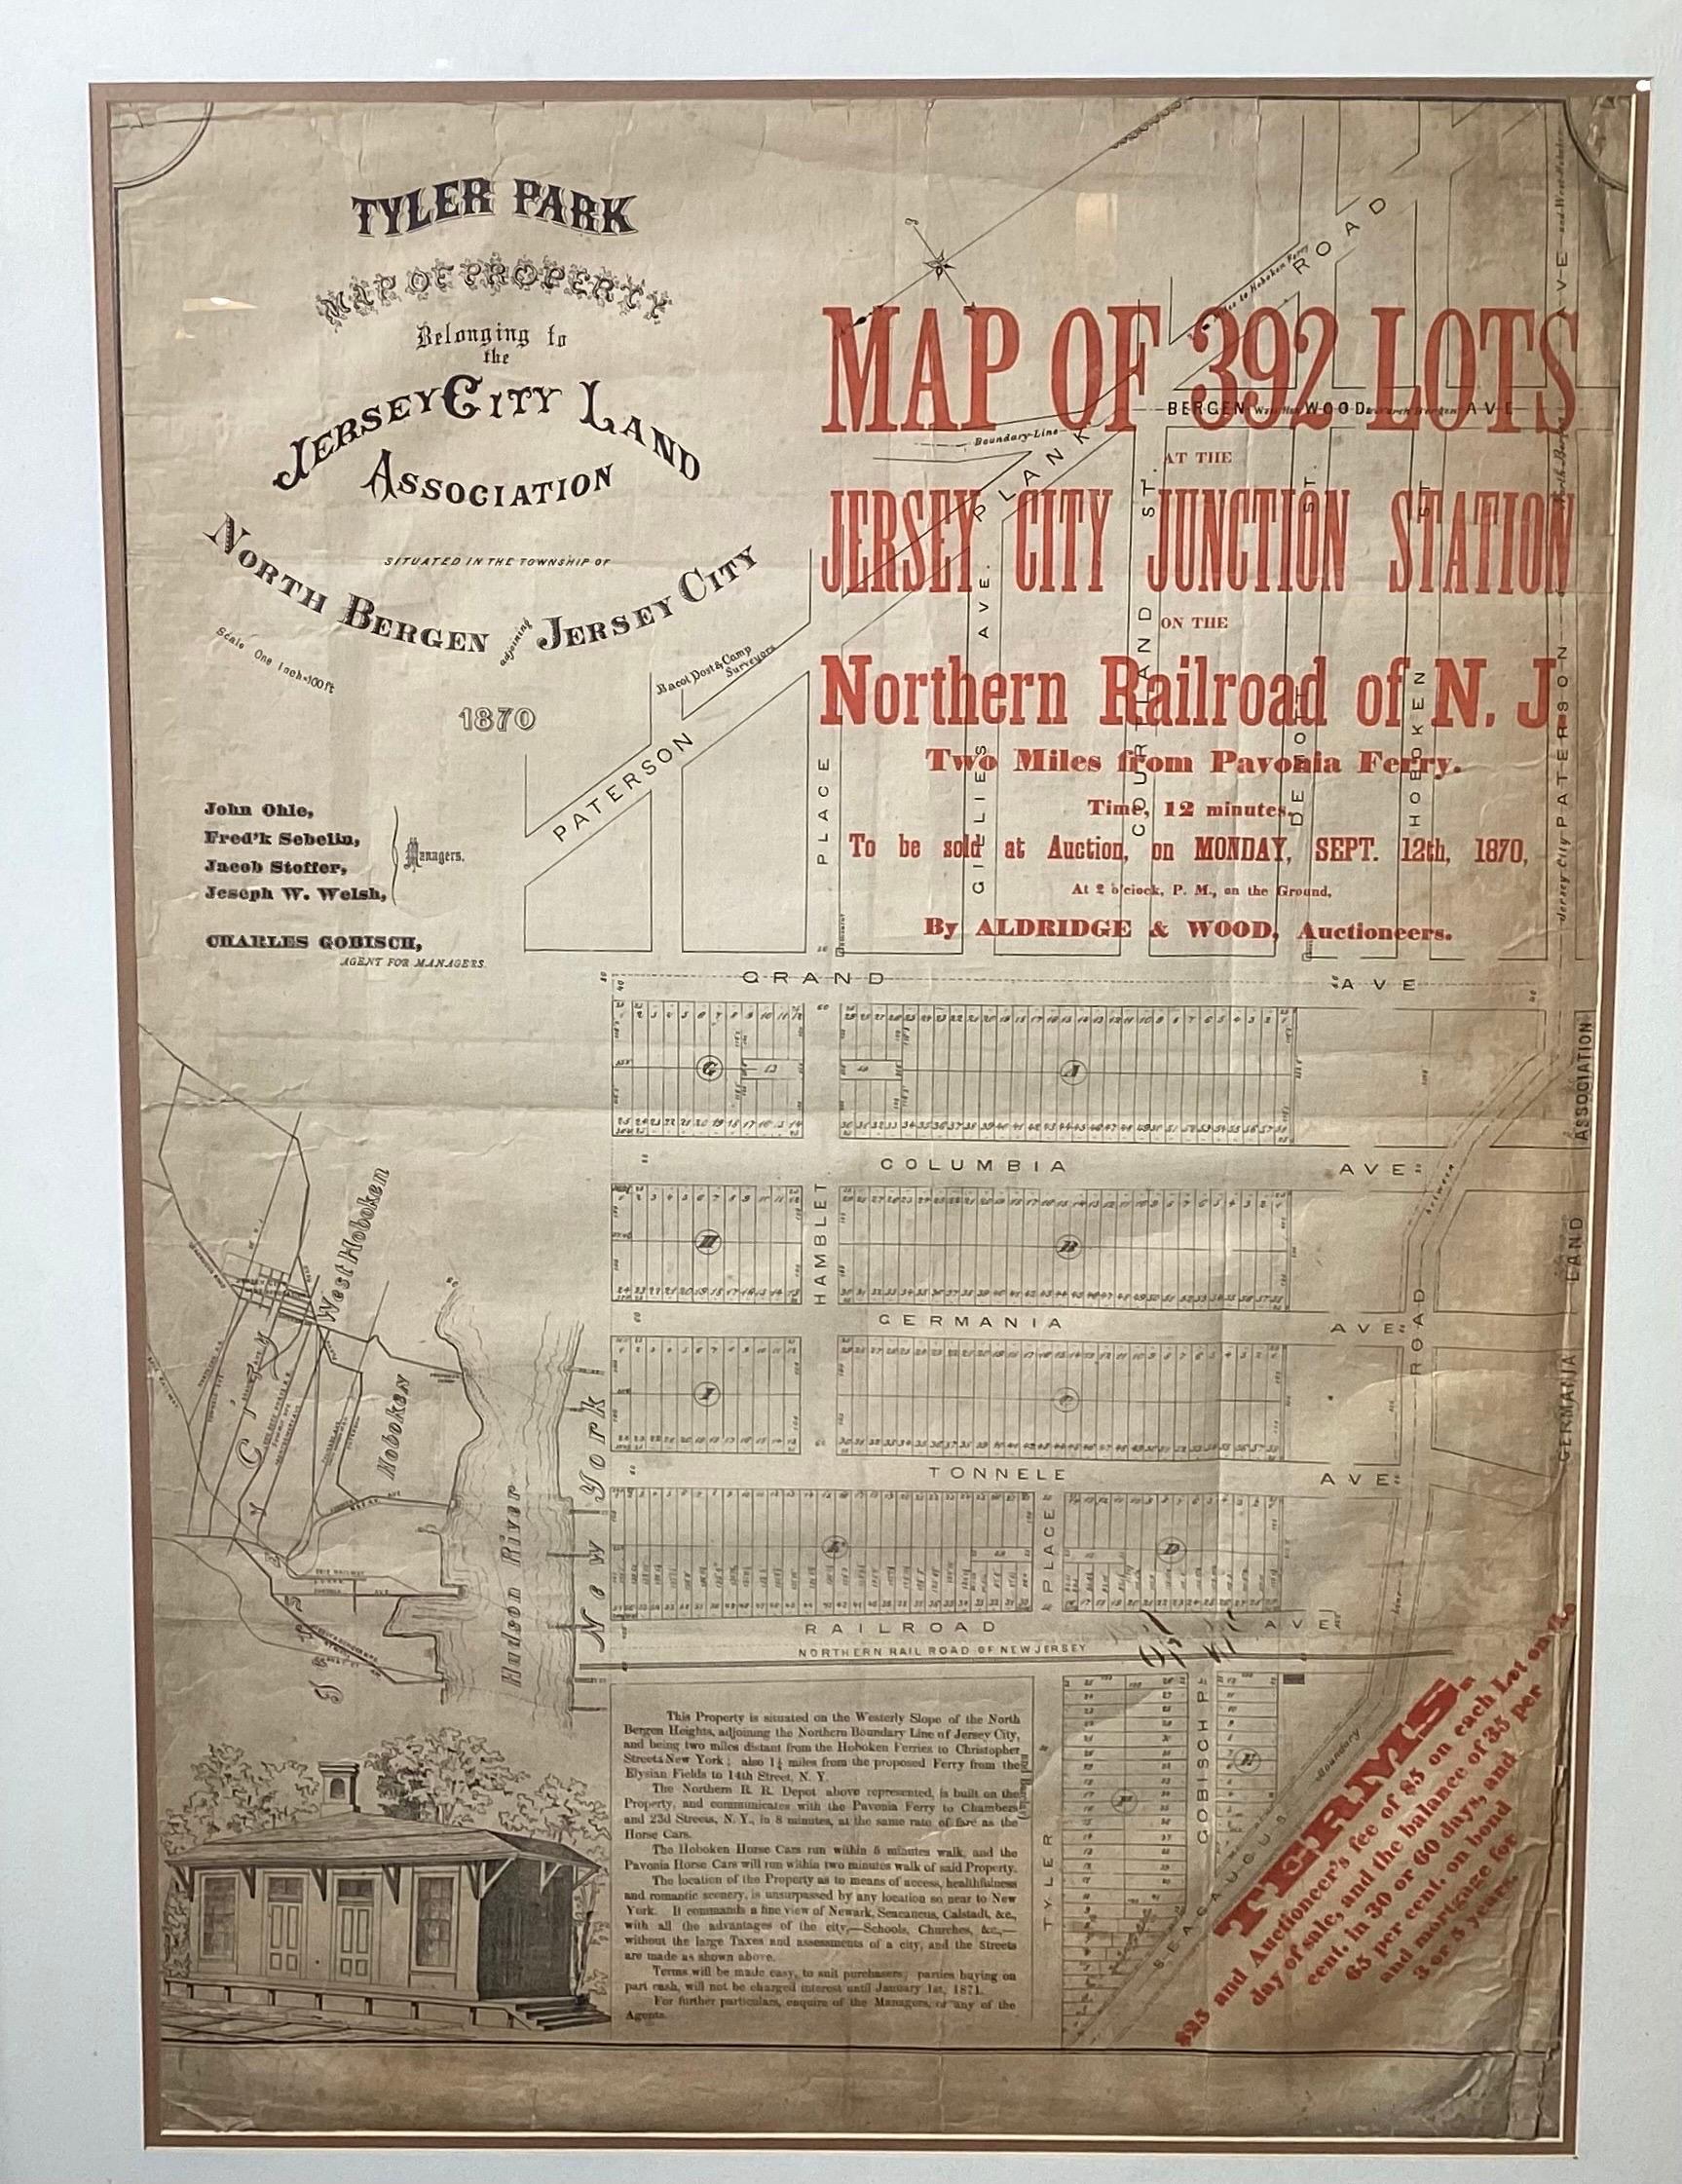 A framed and matted historical map of Tyler park jersey city New Jersey Railroad. The paper on canvas in later appropriate frame. Good condition with some creasing and age discoloration, small tear about .25 inch top right. The shows the northern